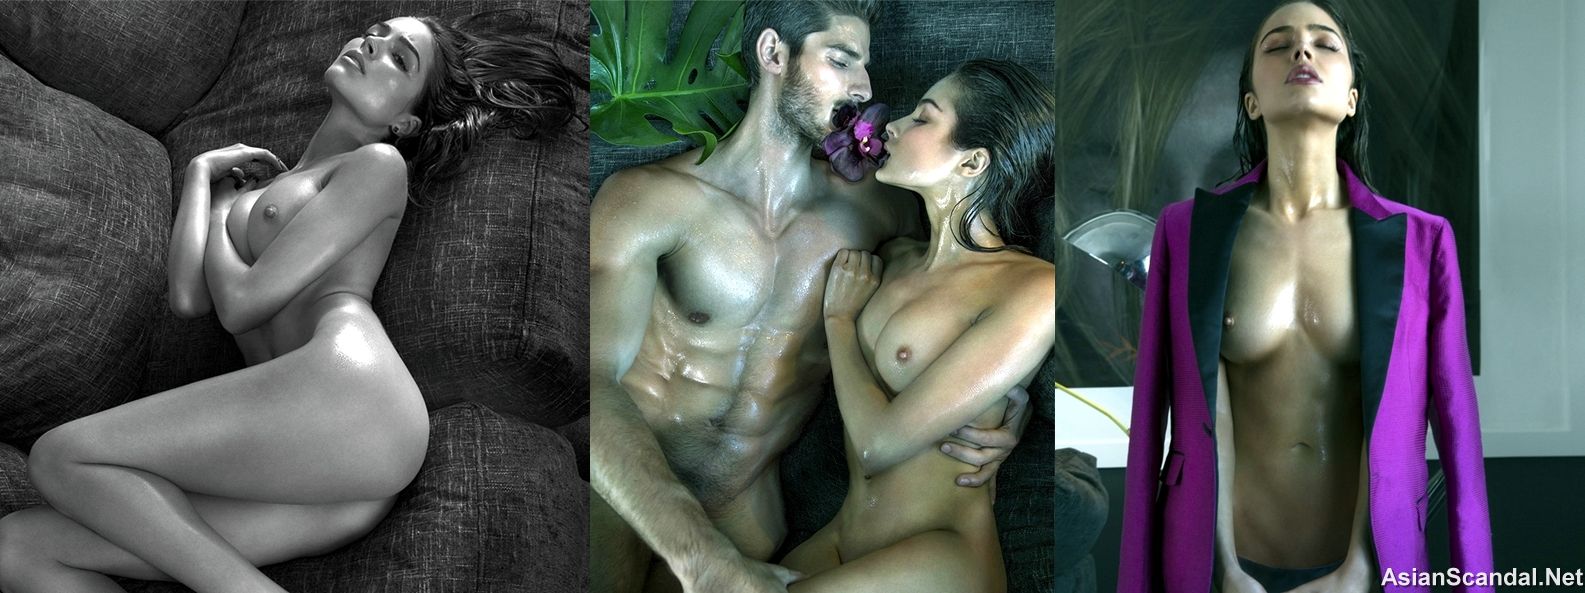 Miss USA 2012 & Miss Universe 2012 Olivia Culpo Bares All in Her First Naked Shoot